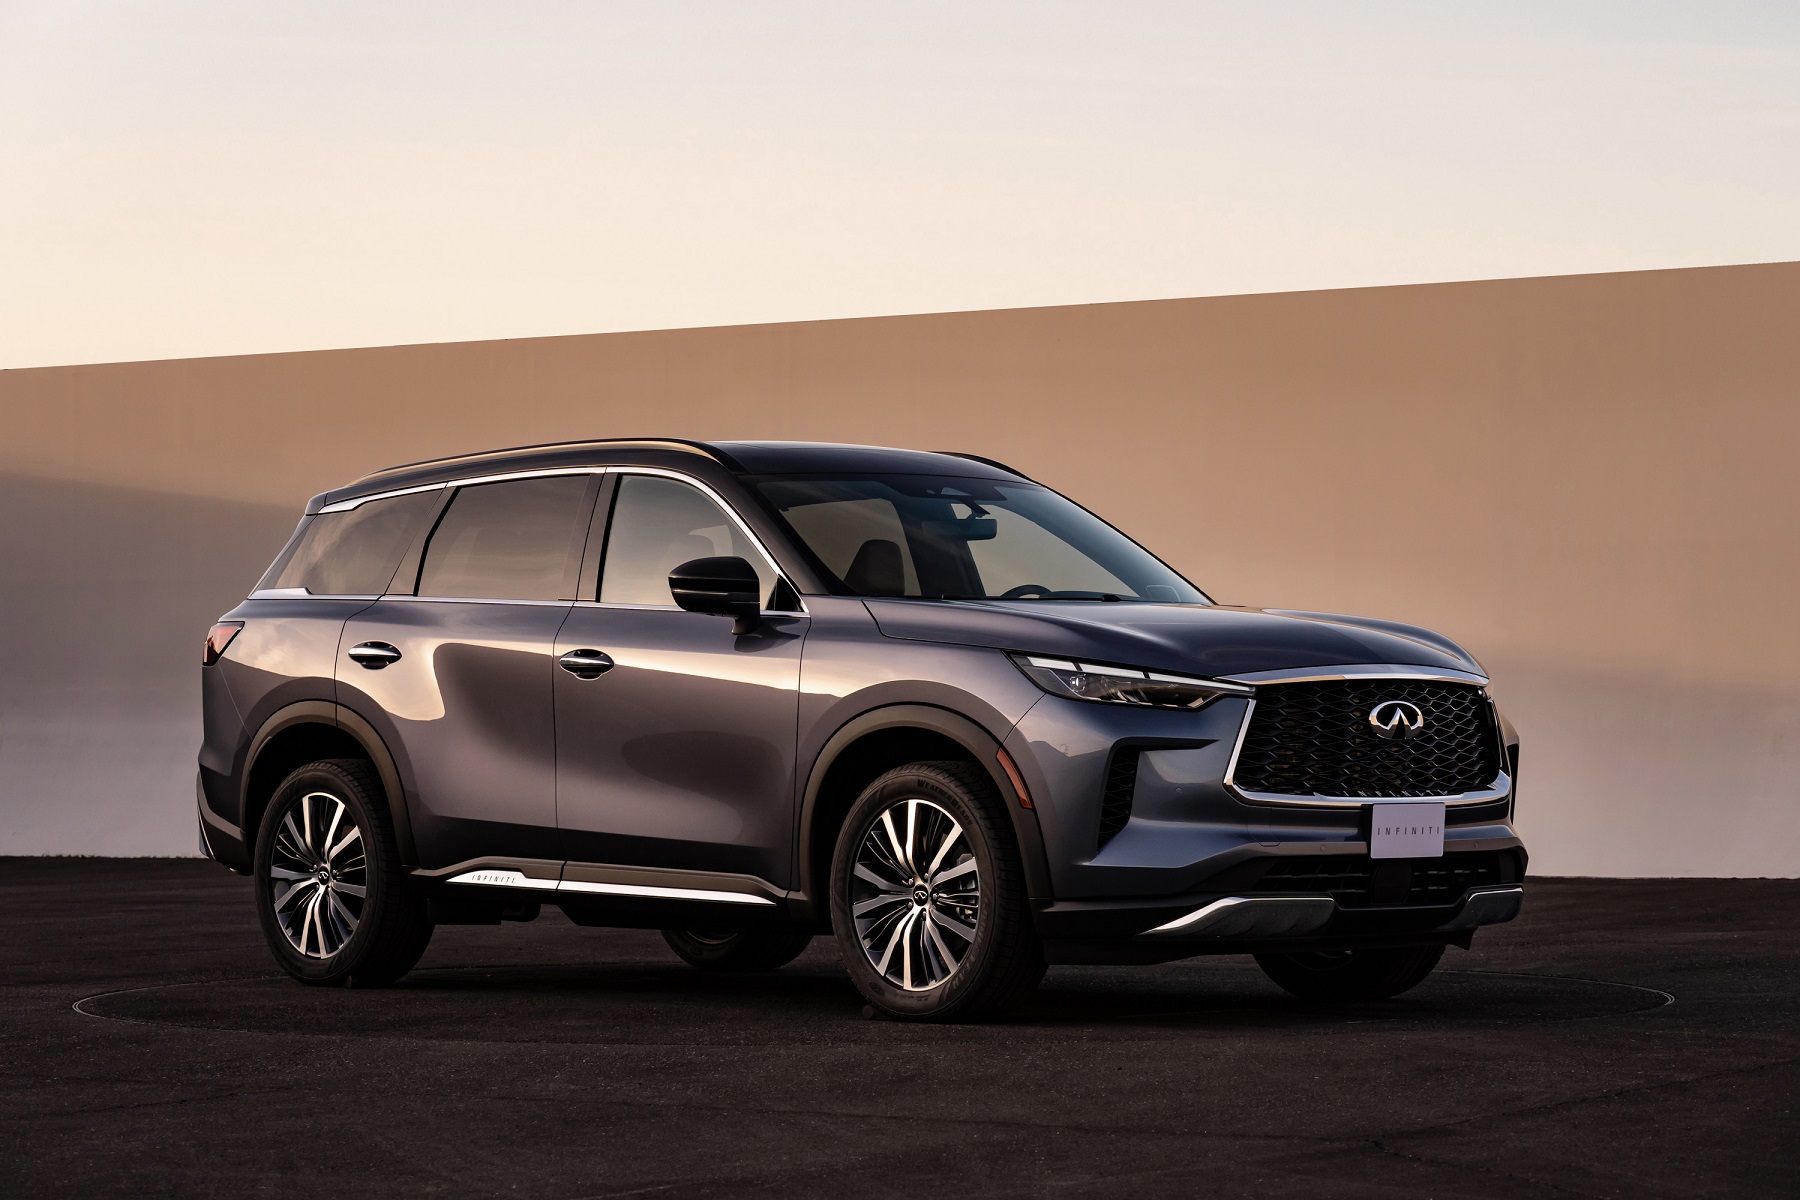 All-new INFINITI QX60 set to arrive in showrooms across the Middle East